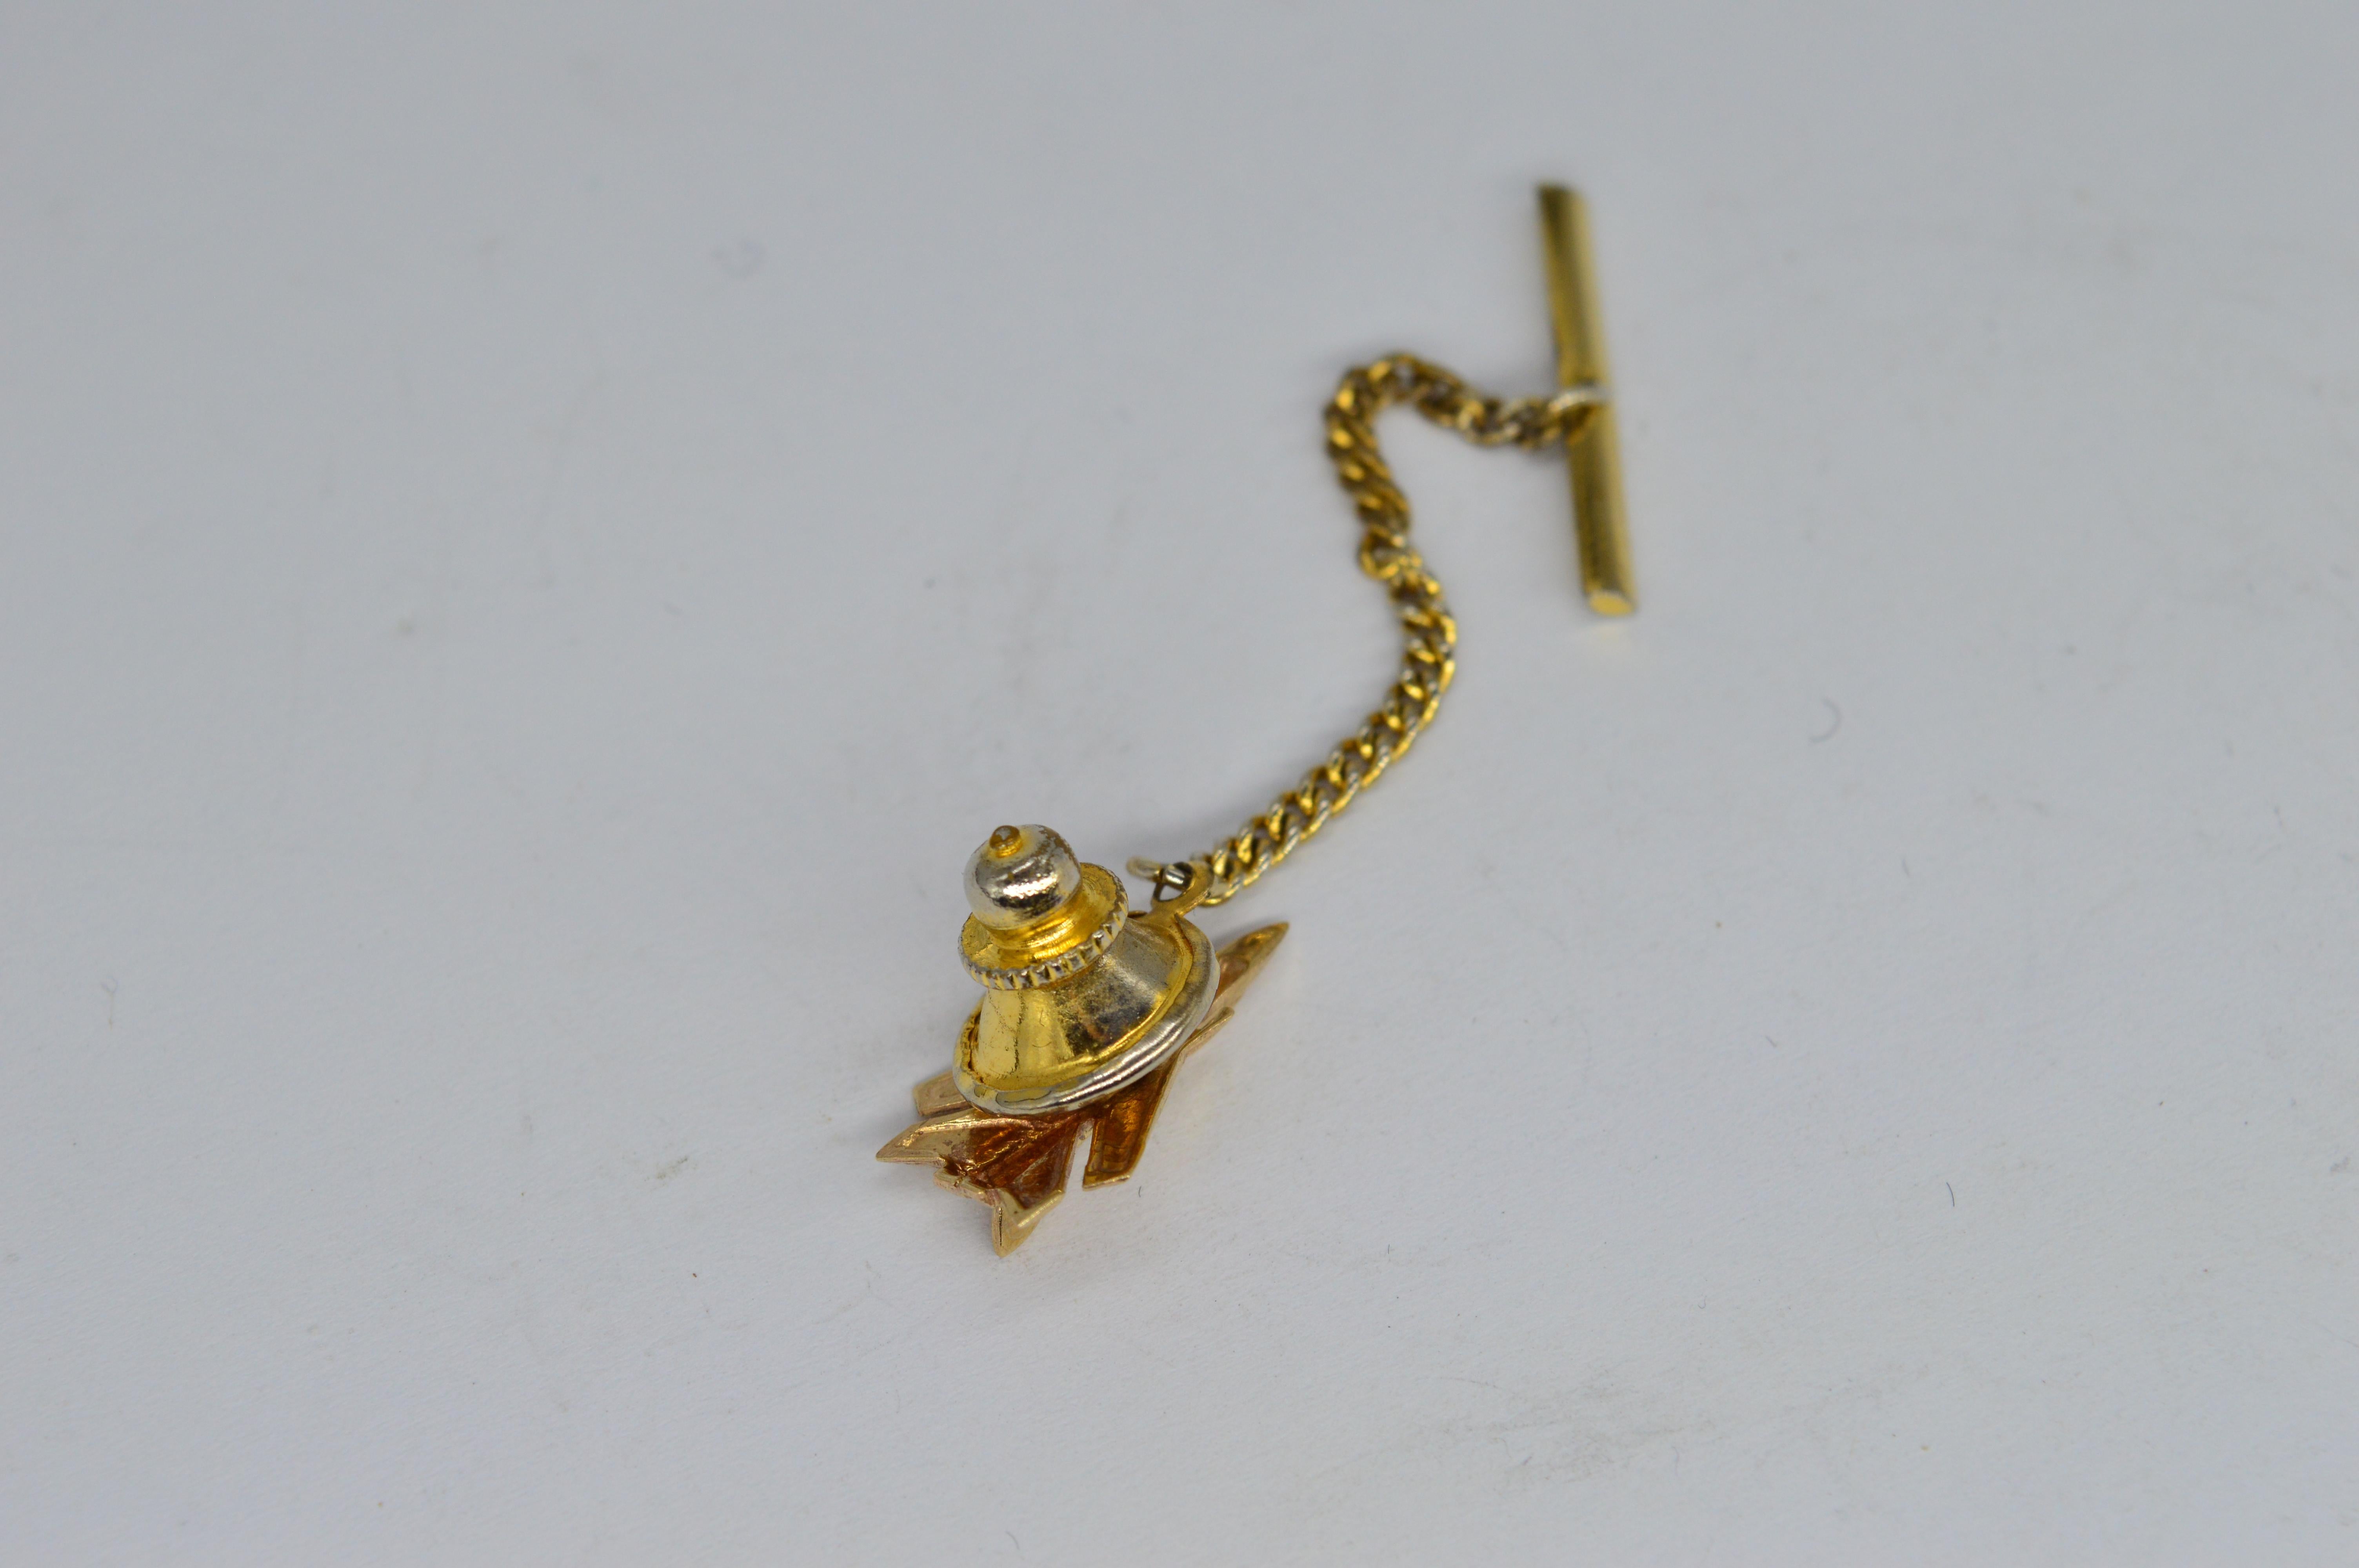 Vintage 9ct Yellow Gold Harrier Jet RAF Statement Present Tie Tack Lapel Pin In Good Condition For Sale In Benfleet, GB